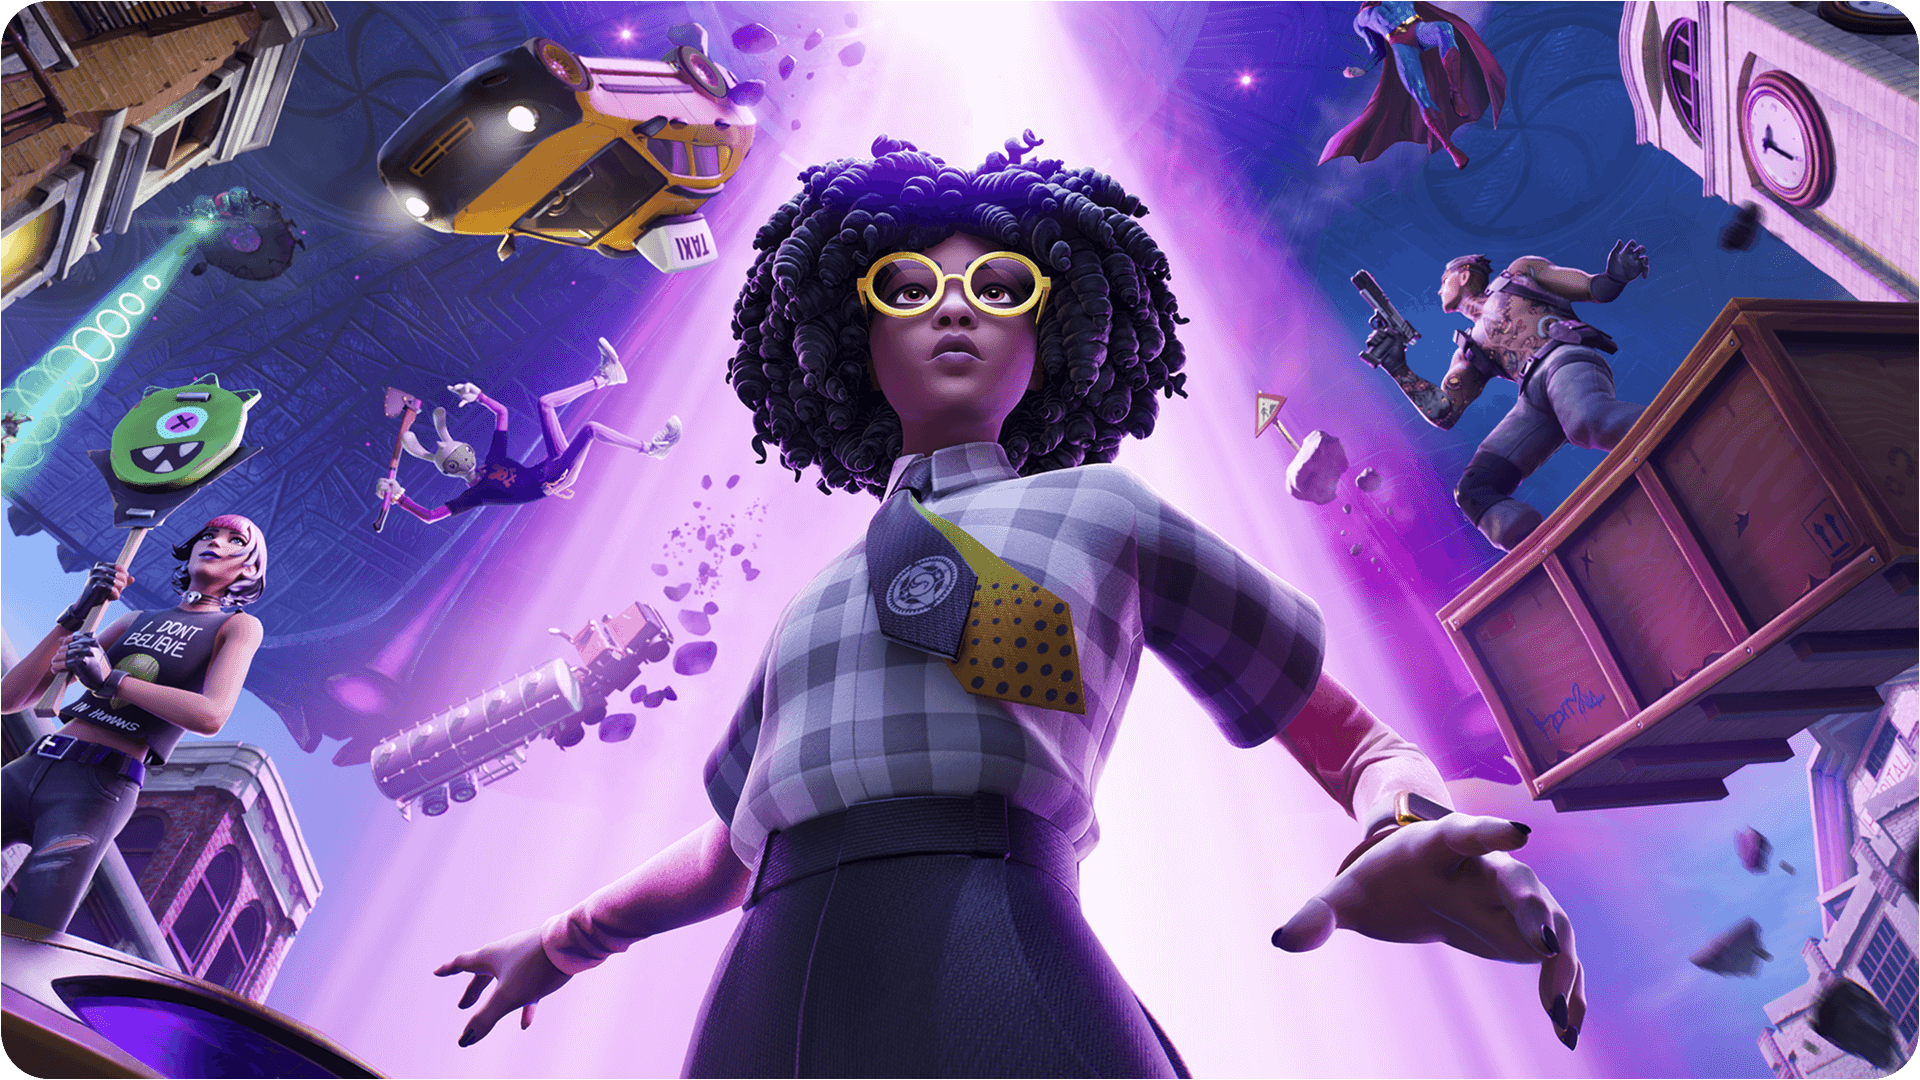 Fortnite key art featuring a female character silhouetted against a bright purple background.